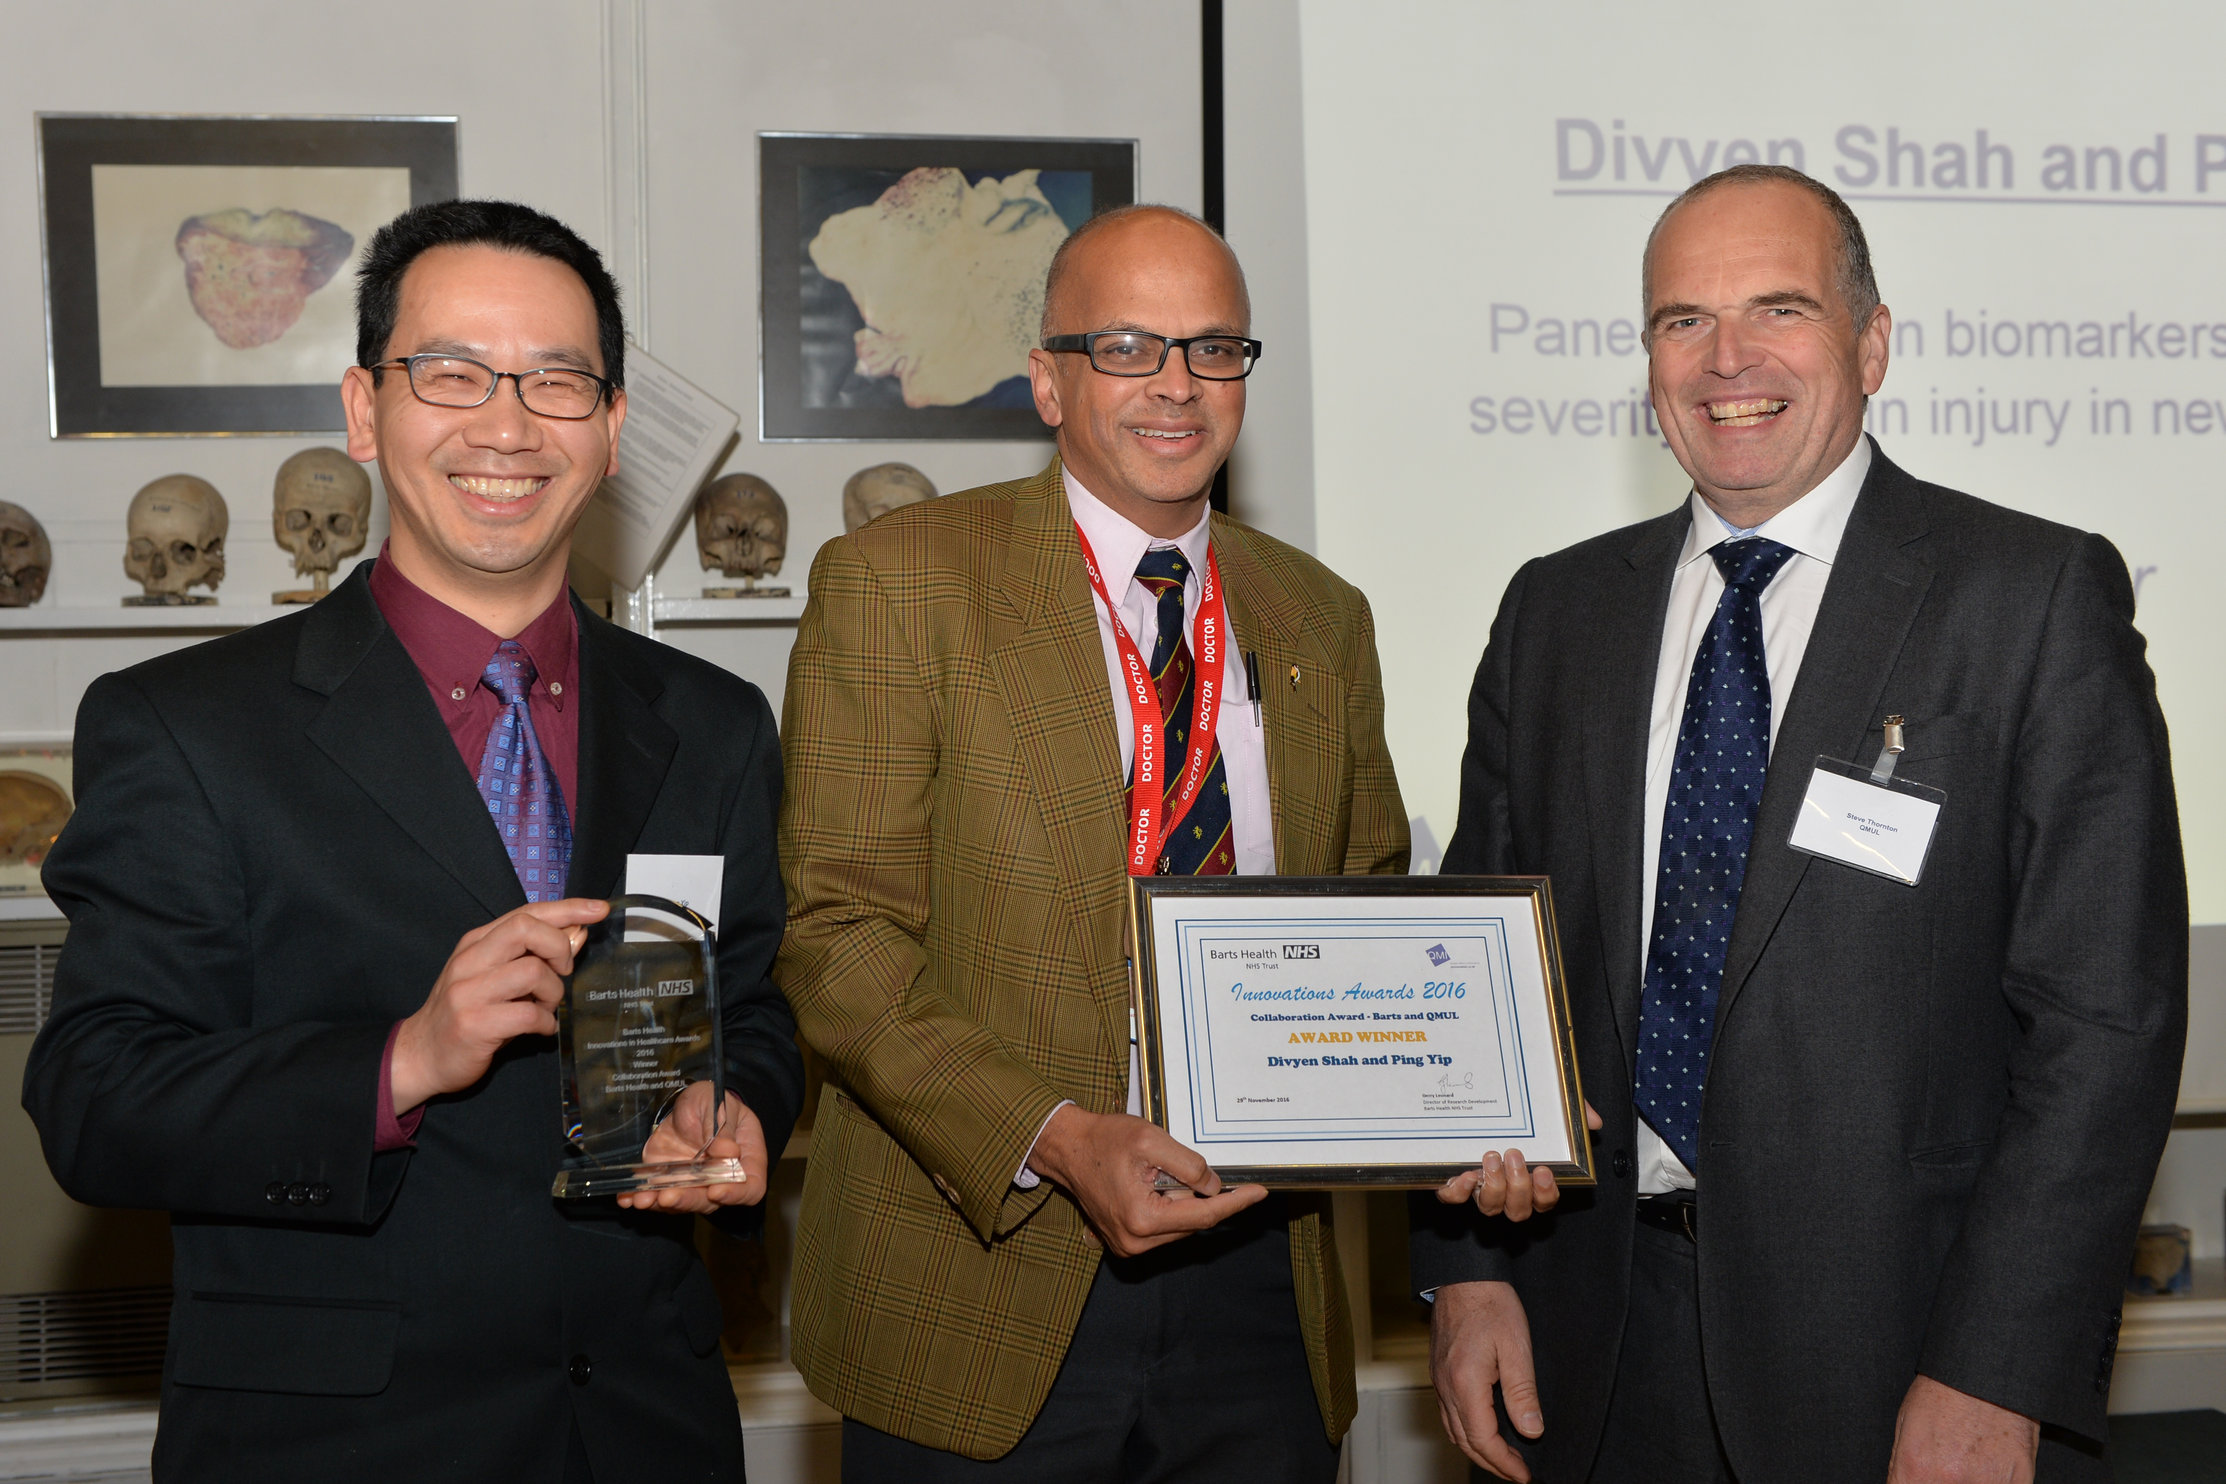 Winners of the Collaboration Award pictured left to right: Dr Ping Yip, Dr Divyen Shah and Professor Steve Thornton